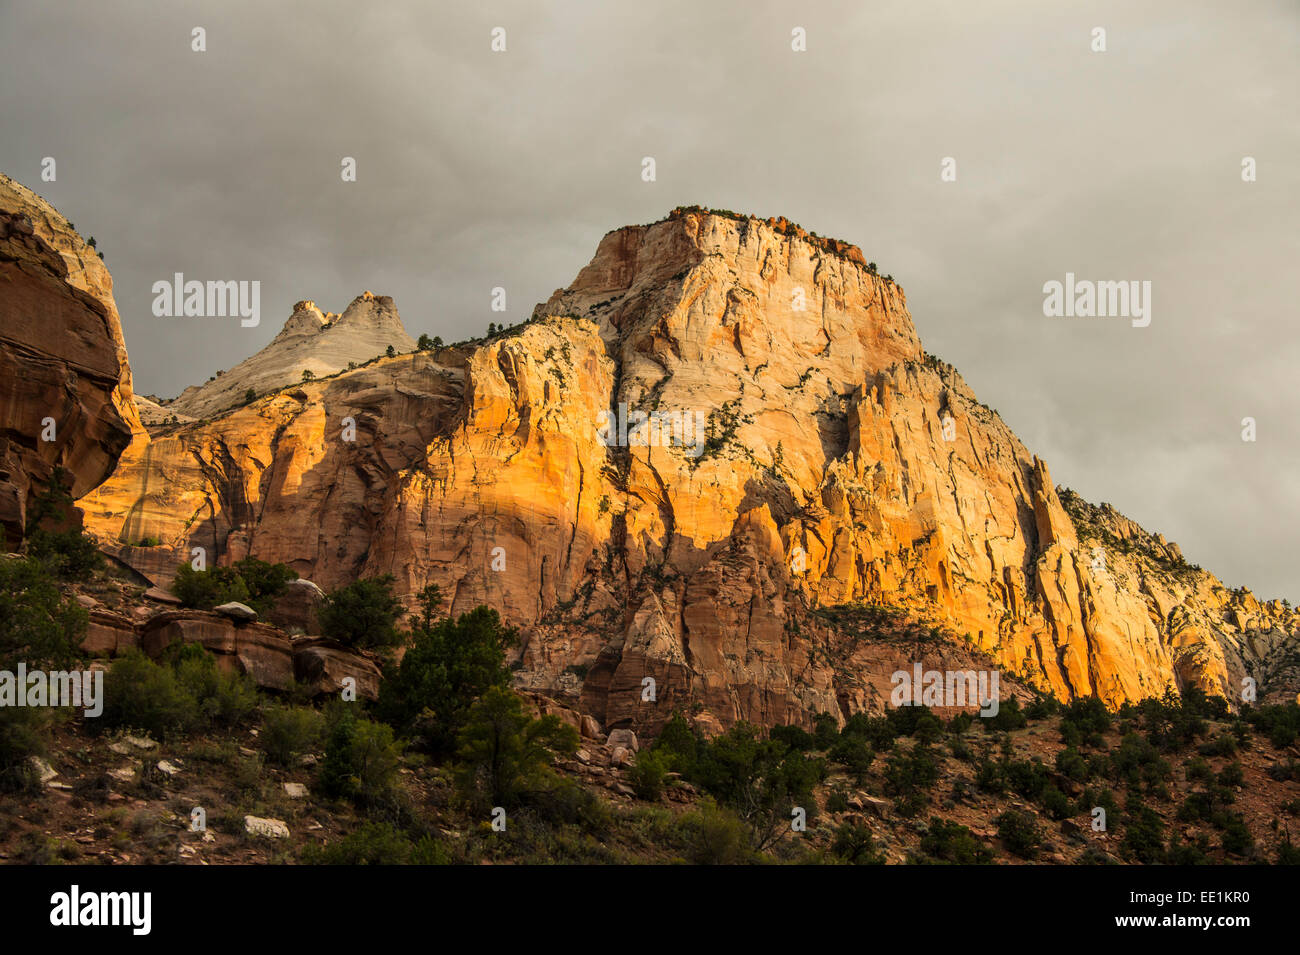 Early morning sunlight shining on the towering cliffs of the Zion National Park, Utah, United States of America, North America Stock Photo